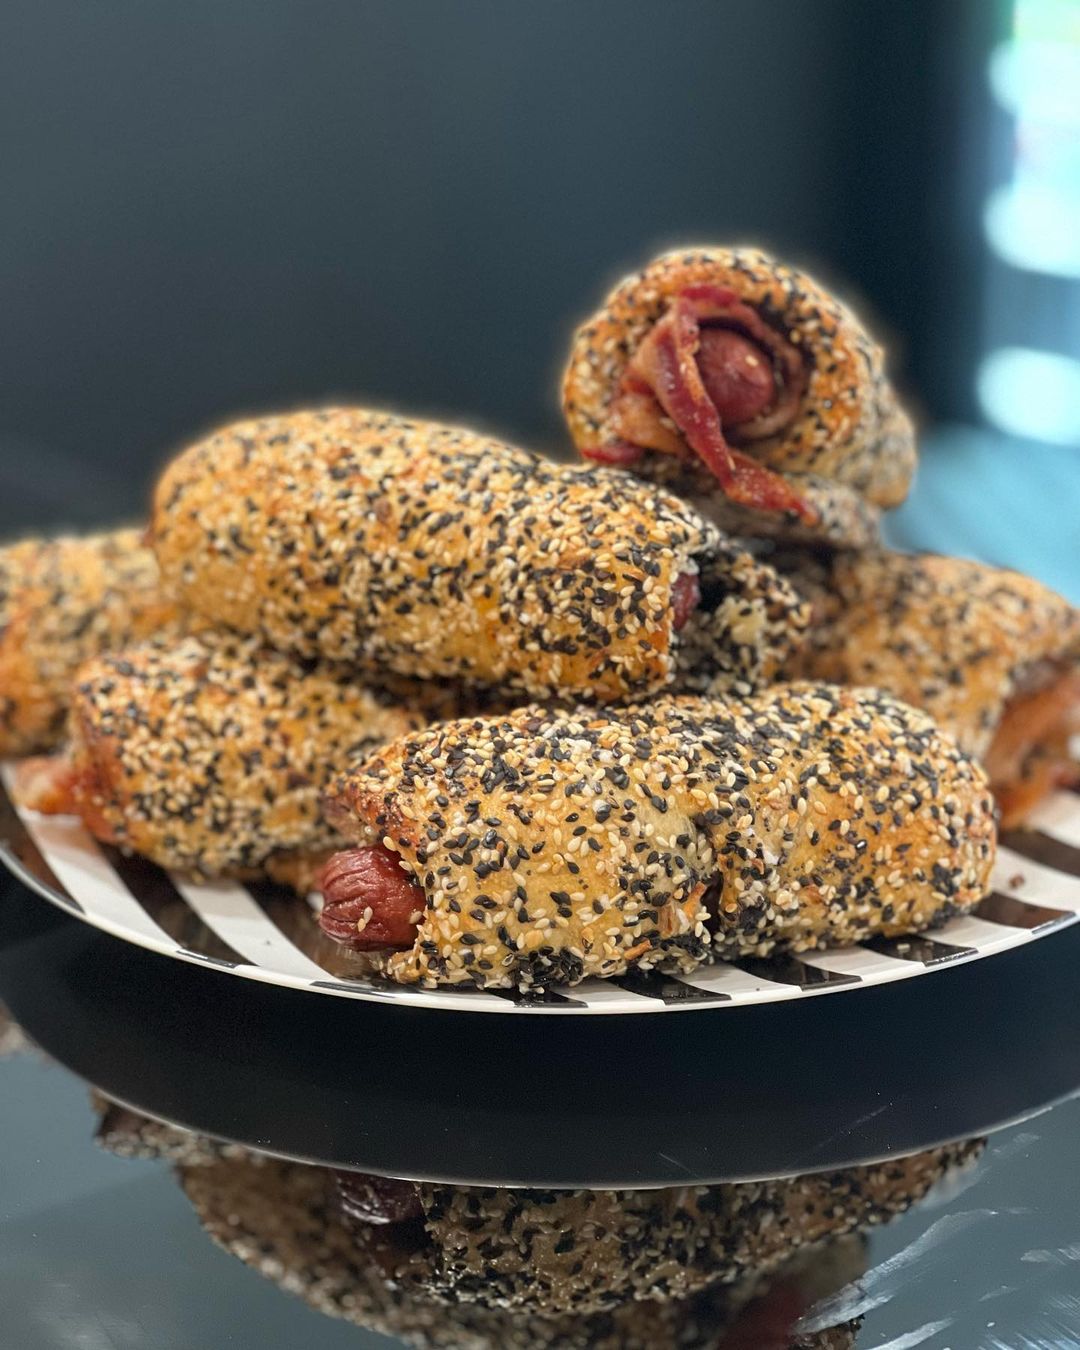 Bagel dogs from The Eccentric Bagel 